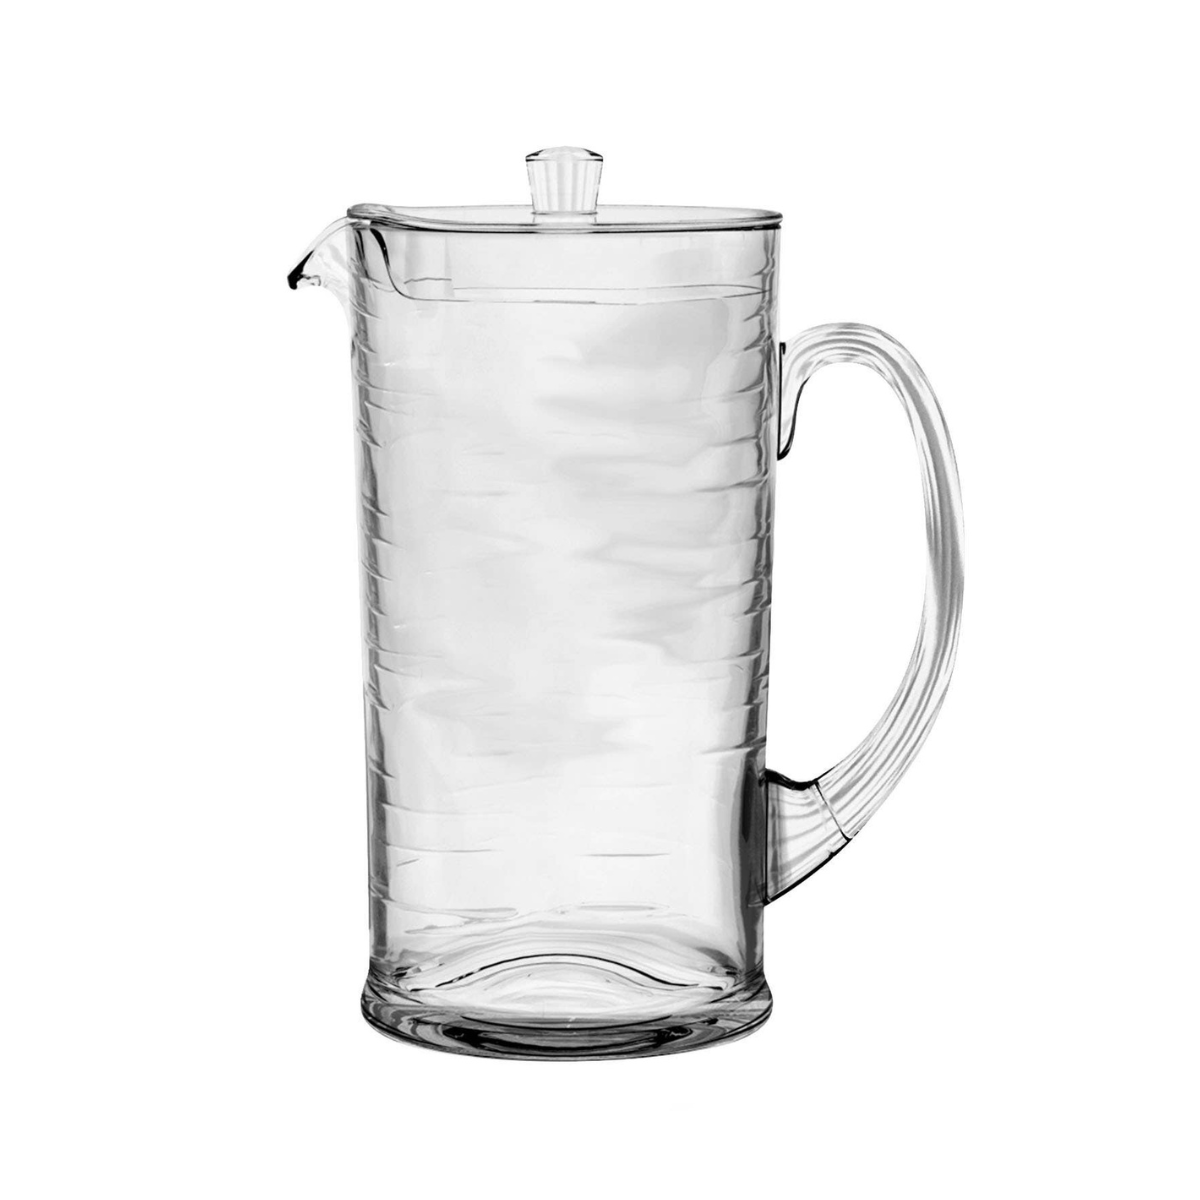 Mirage Acrylic Pitcher With Lid